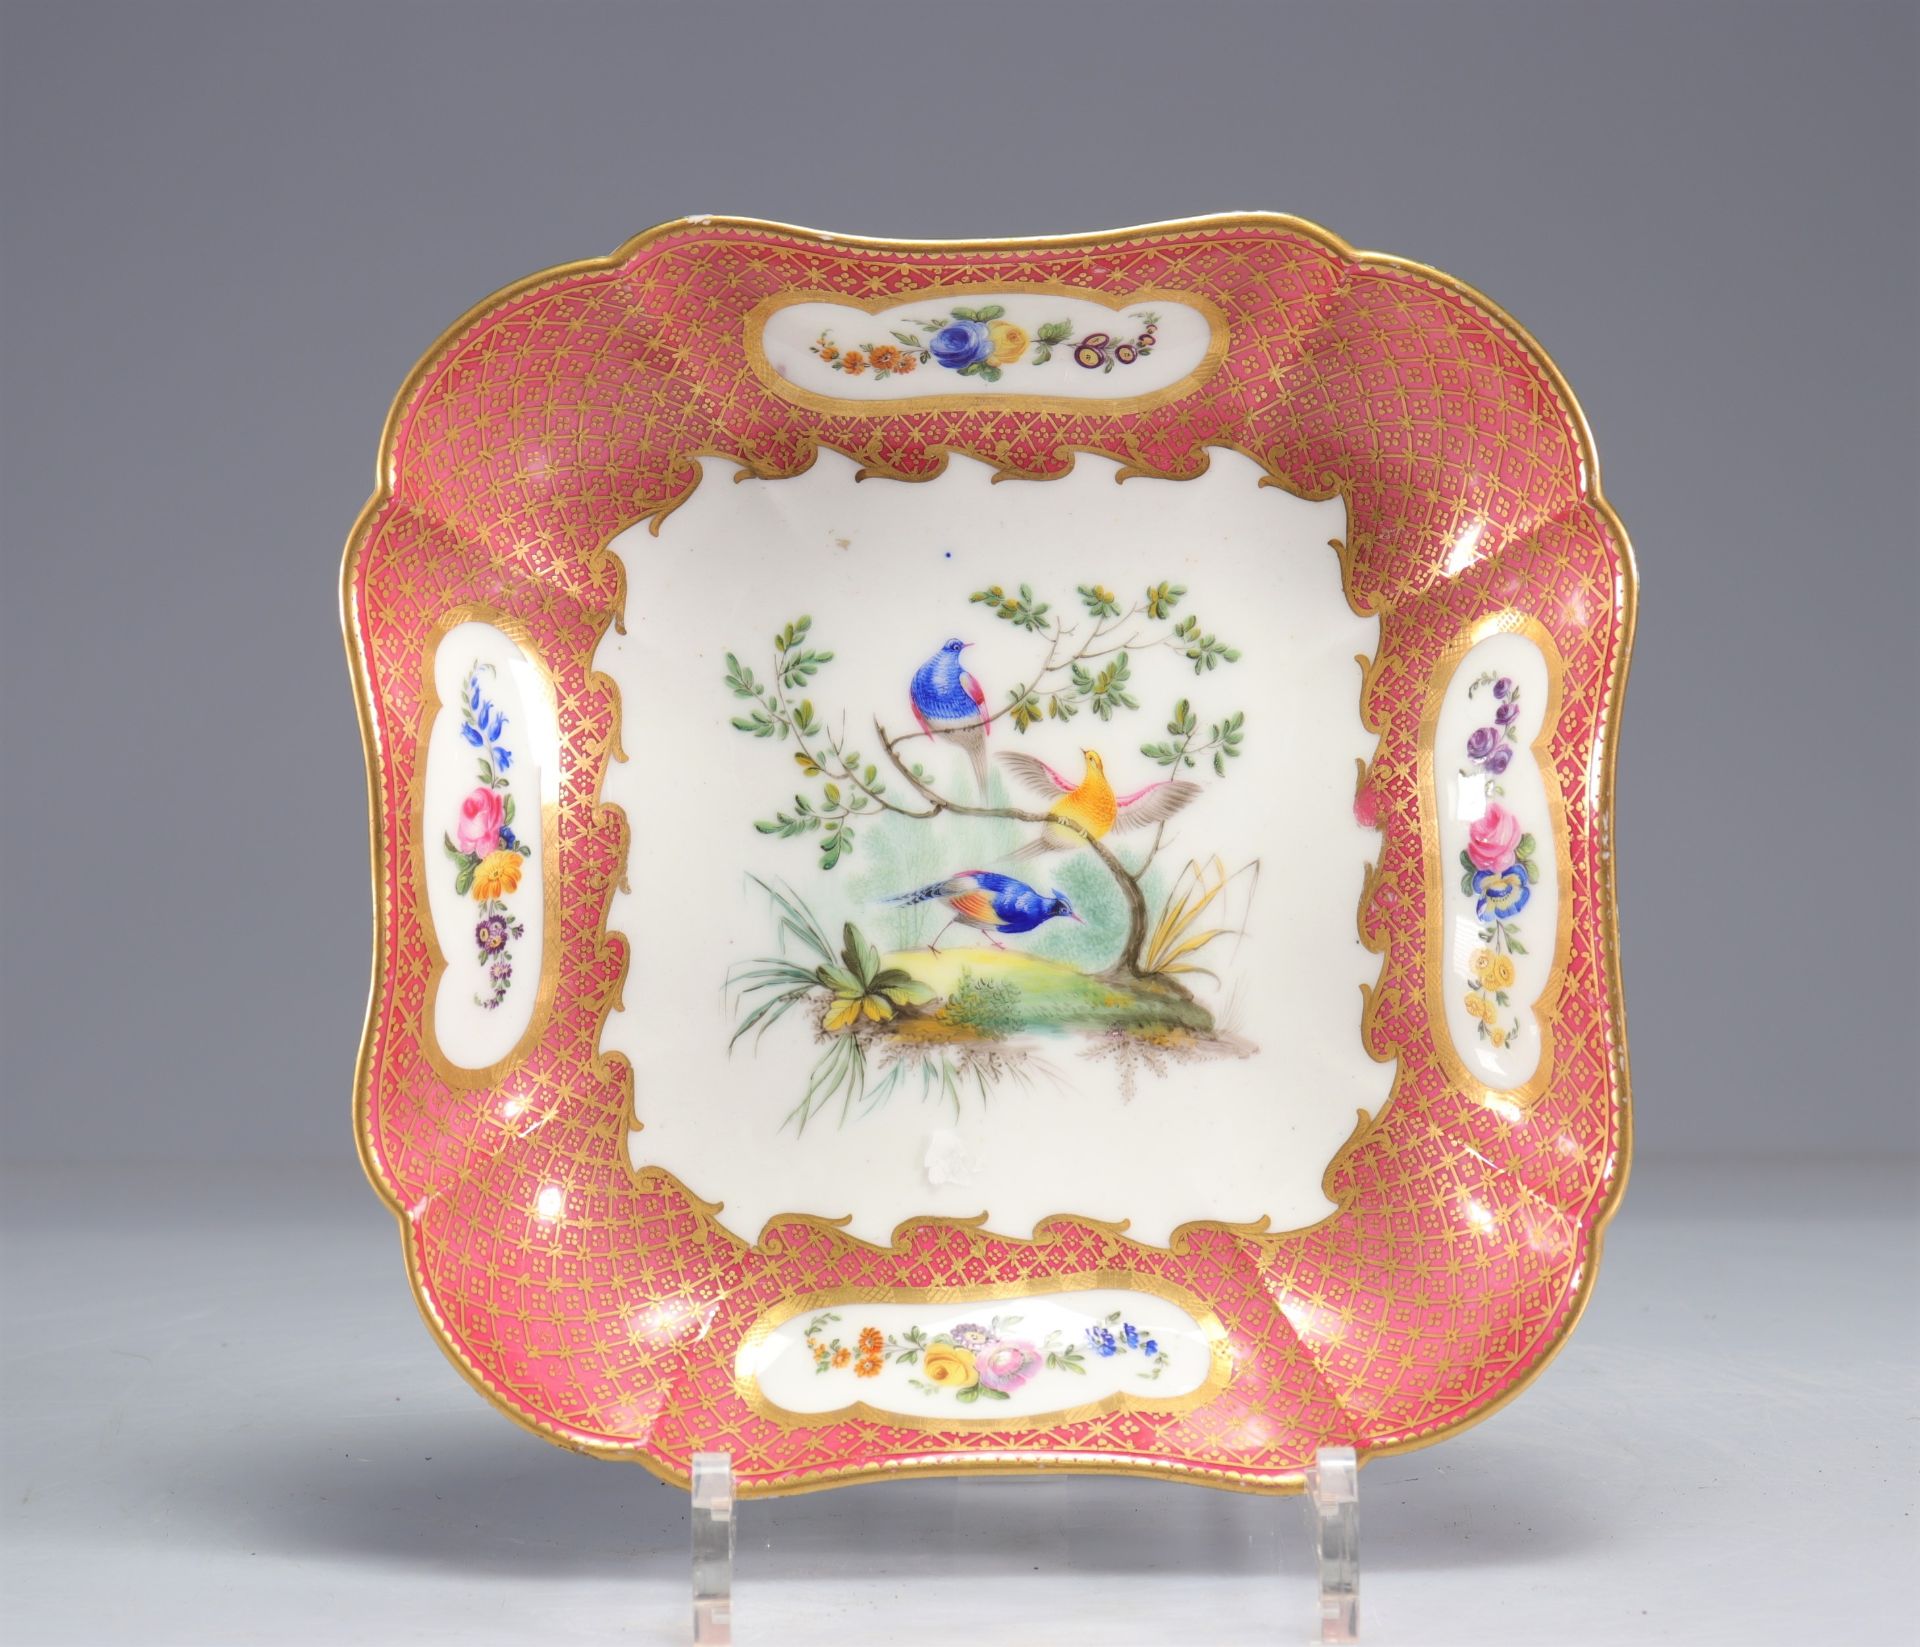 Pair of Sevres porcelain dishes decorated with birds and flowers, mark of 1761 - Image 3 of 5